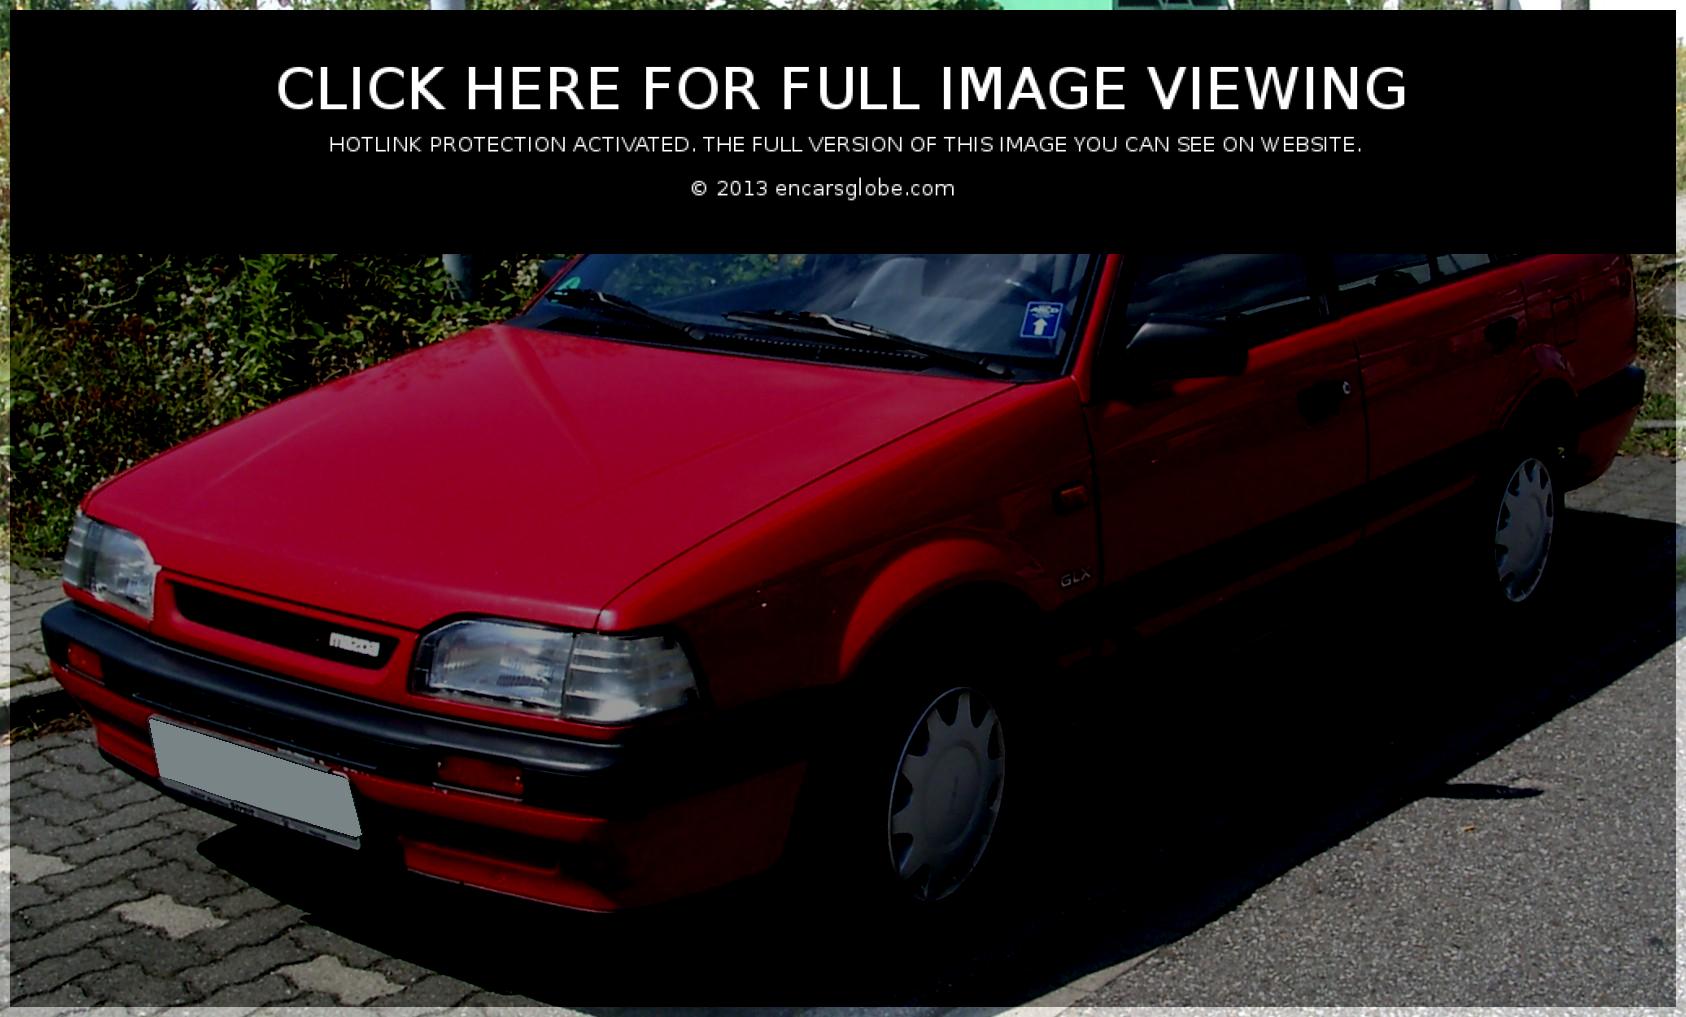 Mazda 929 GLX Photo Gallery: Photo #09 out of 11, Image Size ...